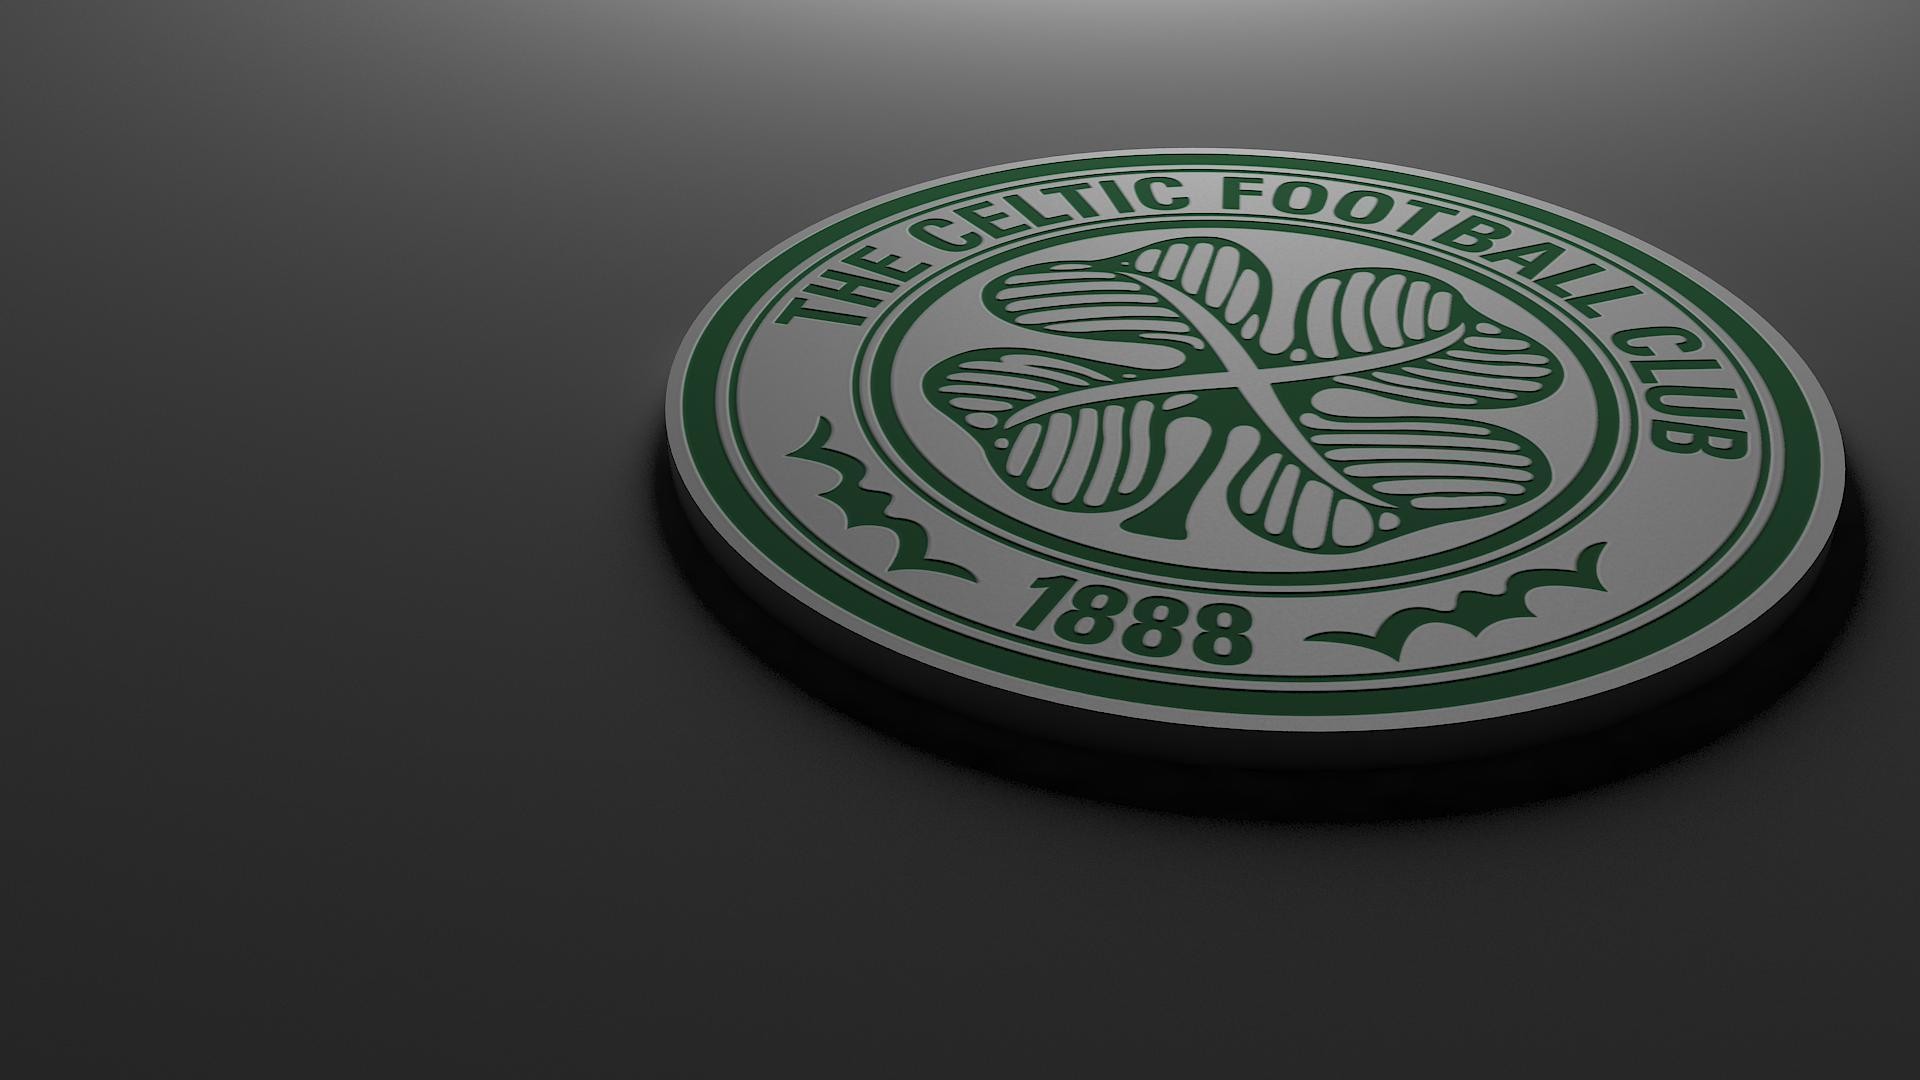 1920x1080 Celtic Football Club images celtic wallpaper and background photos .